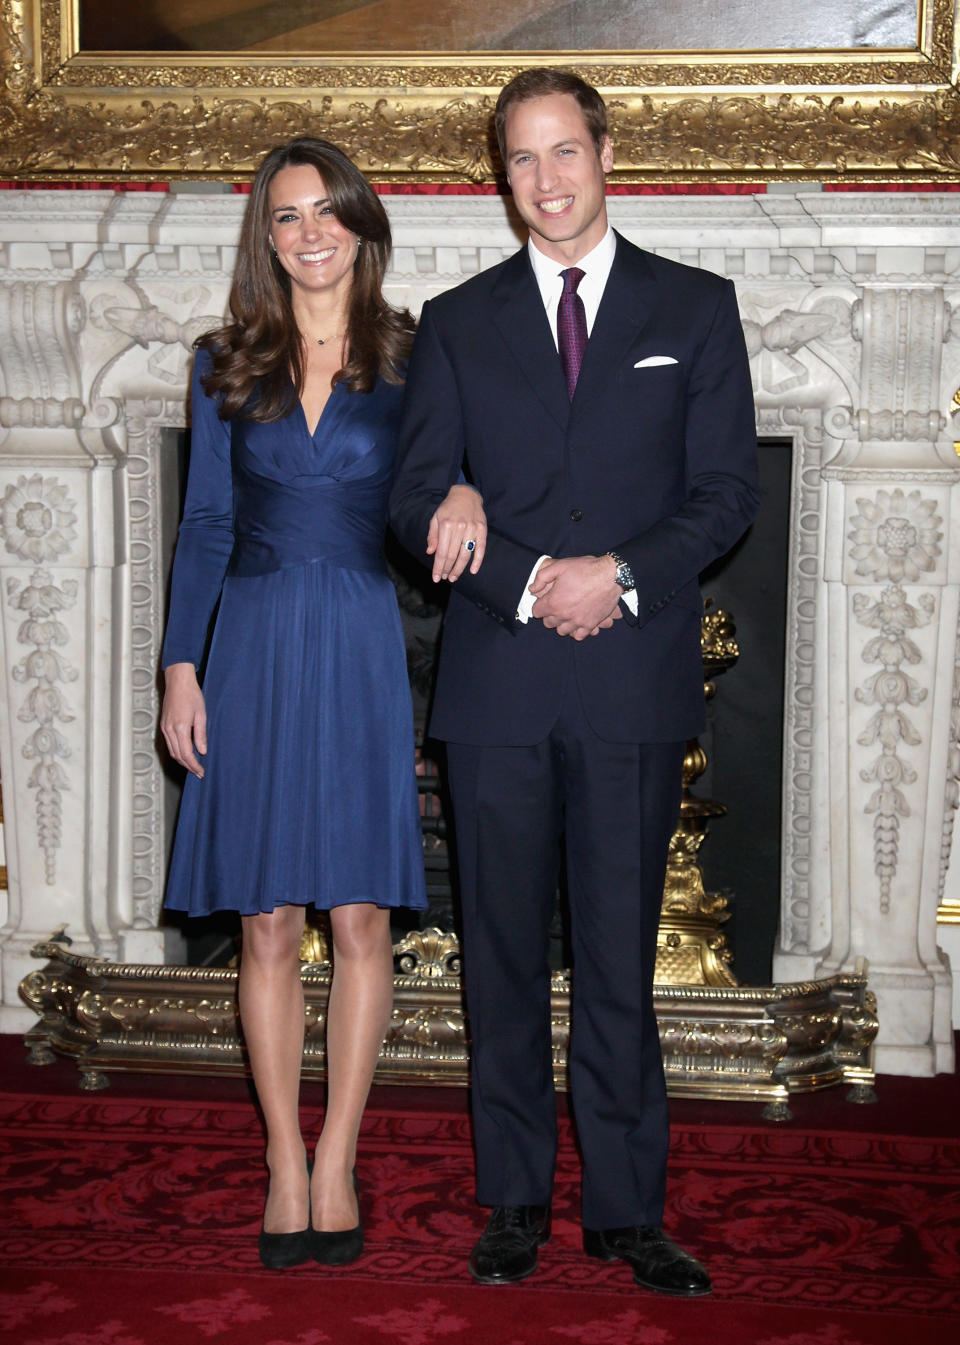 kate middleton in long sleeve navy blue dress, The official engagement announcement of Kate Middleton and Prince William on November 16, 2010 in London, England.